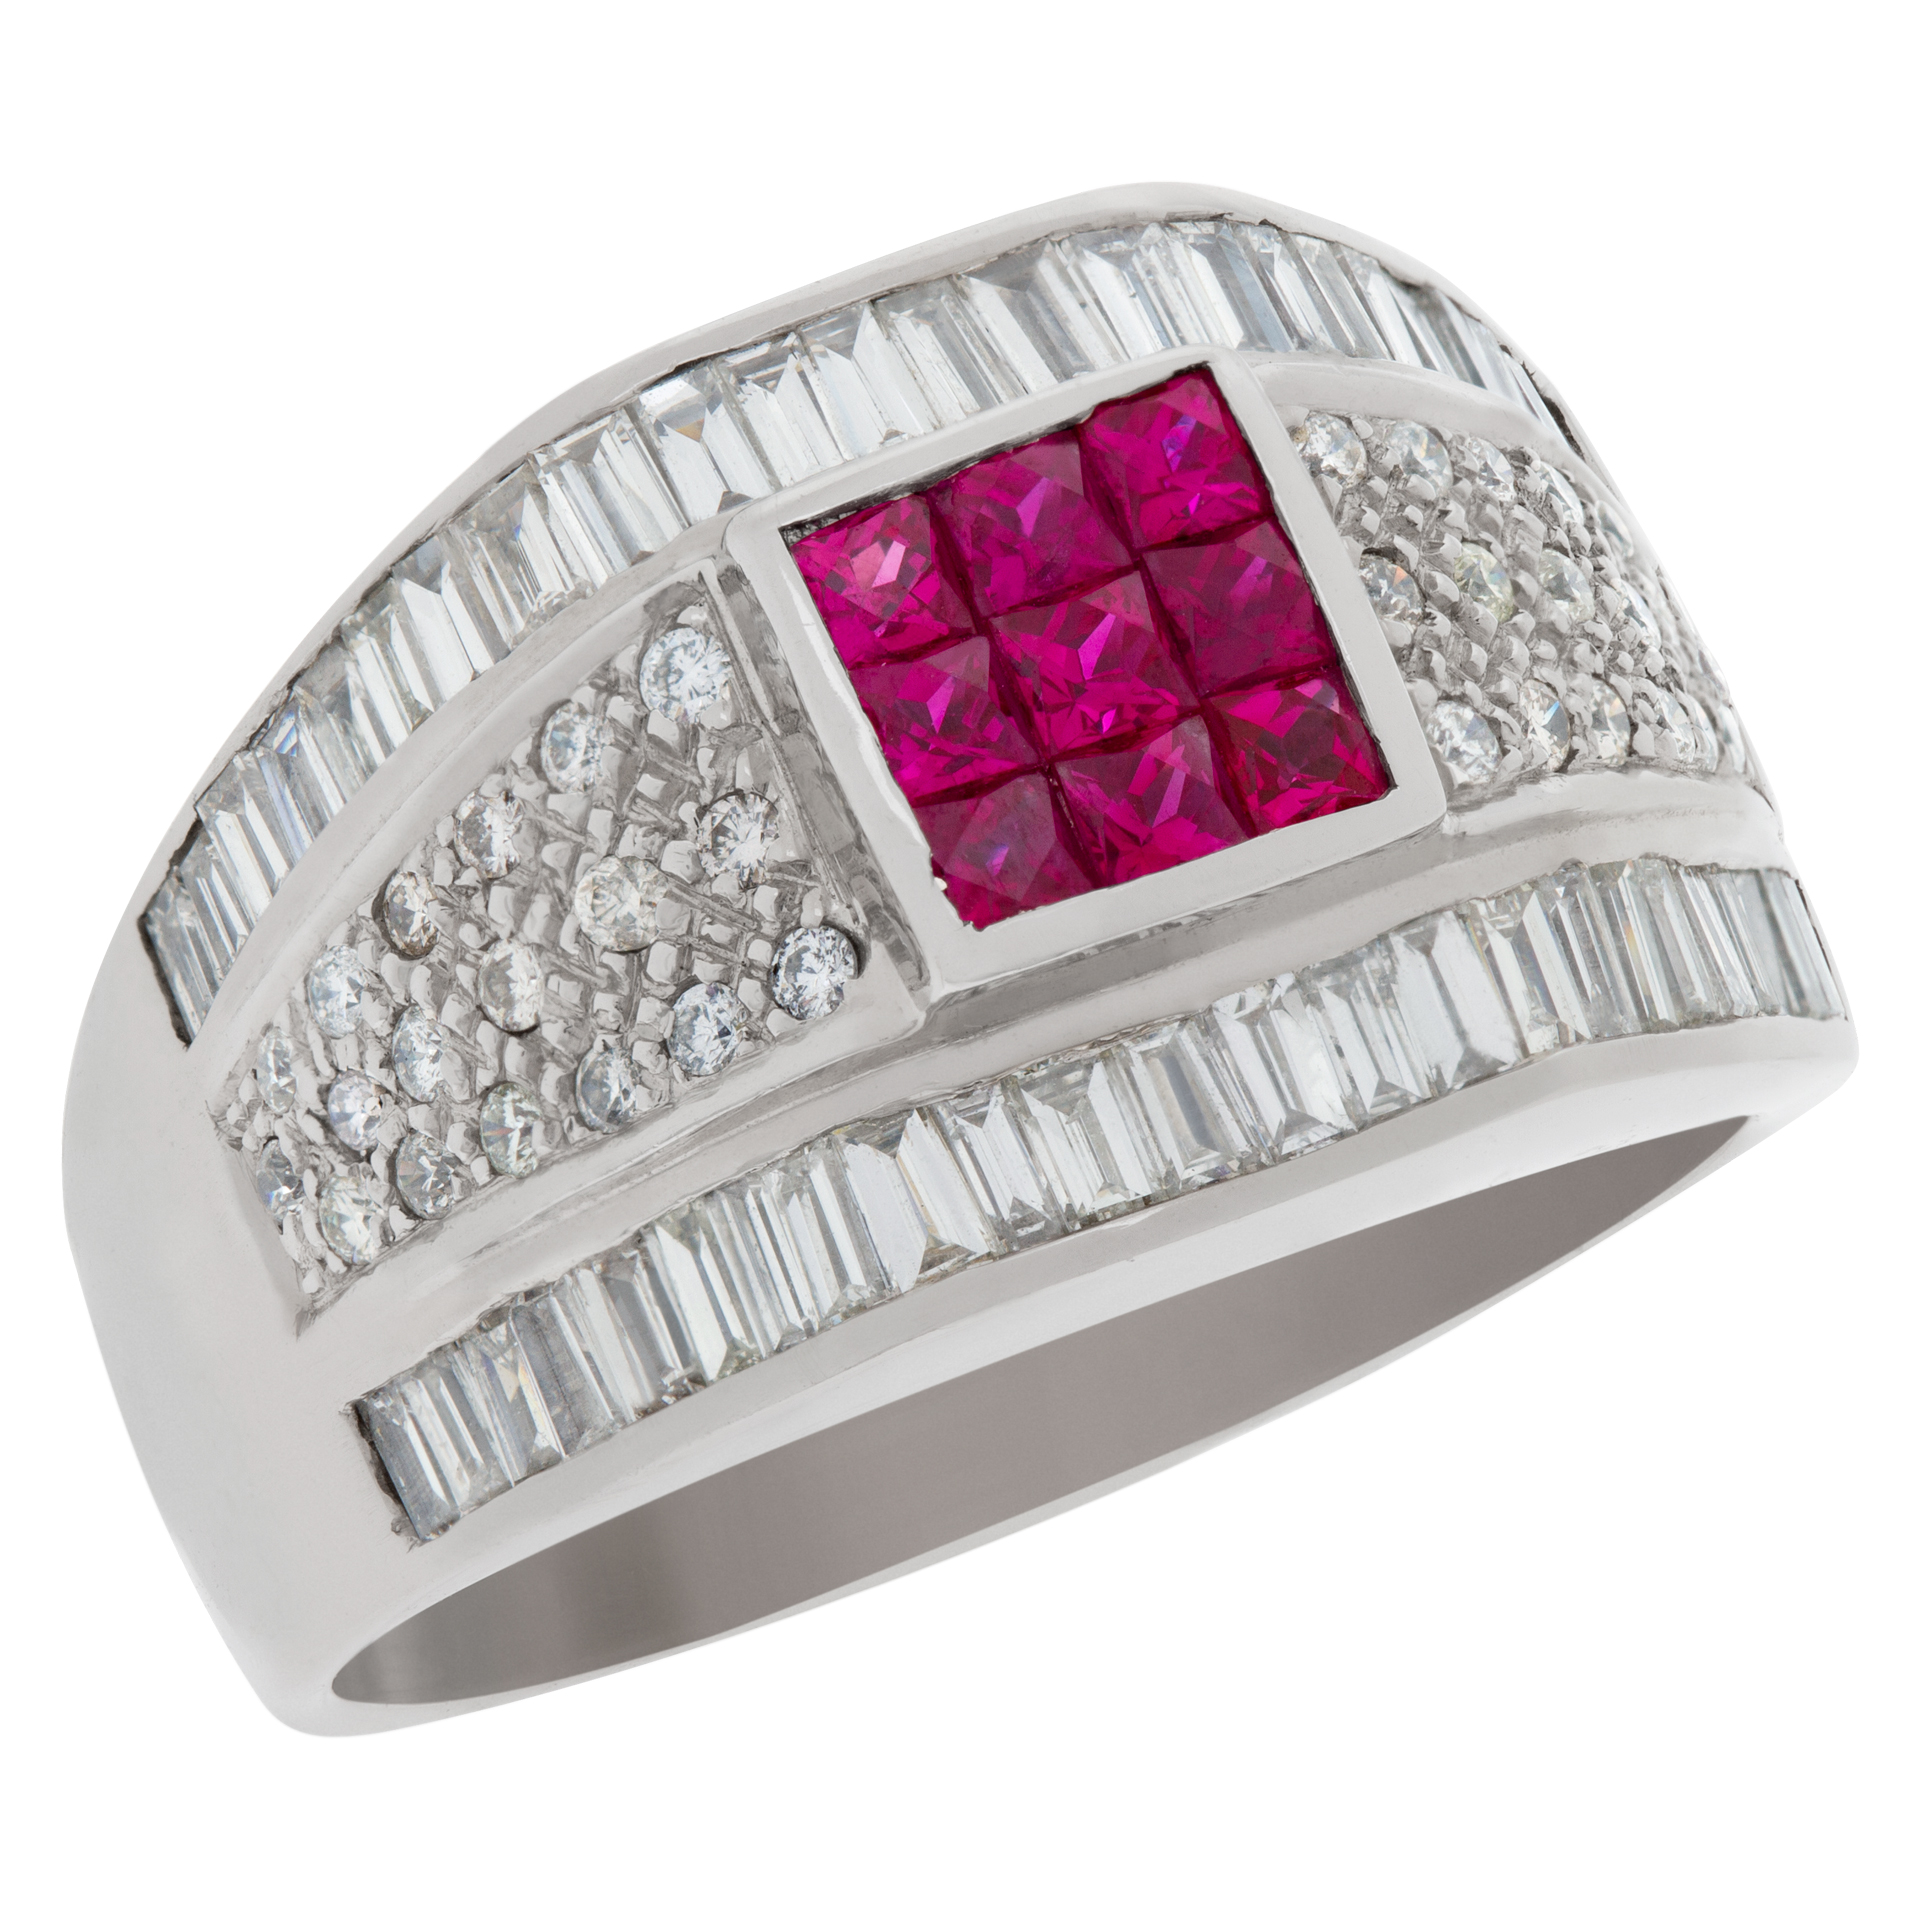 Fancy rubies and diamond ring in 18k white gold. 1.00 carats in diamonds. Size 8.5 image 3